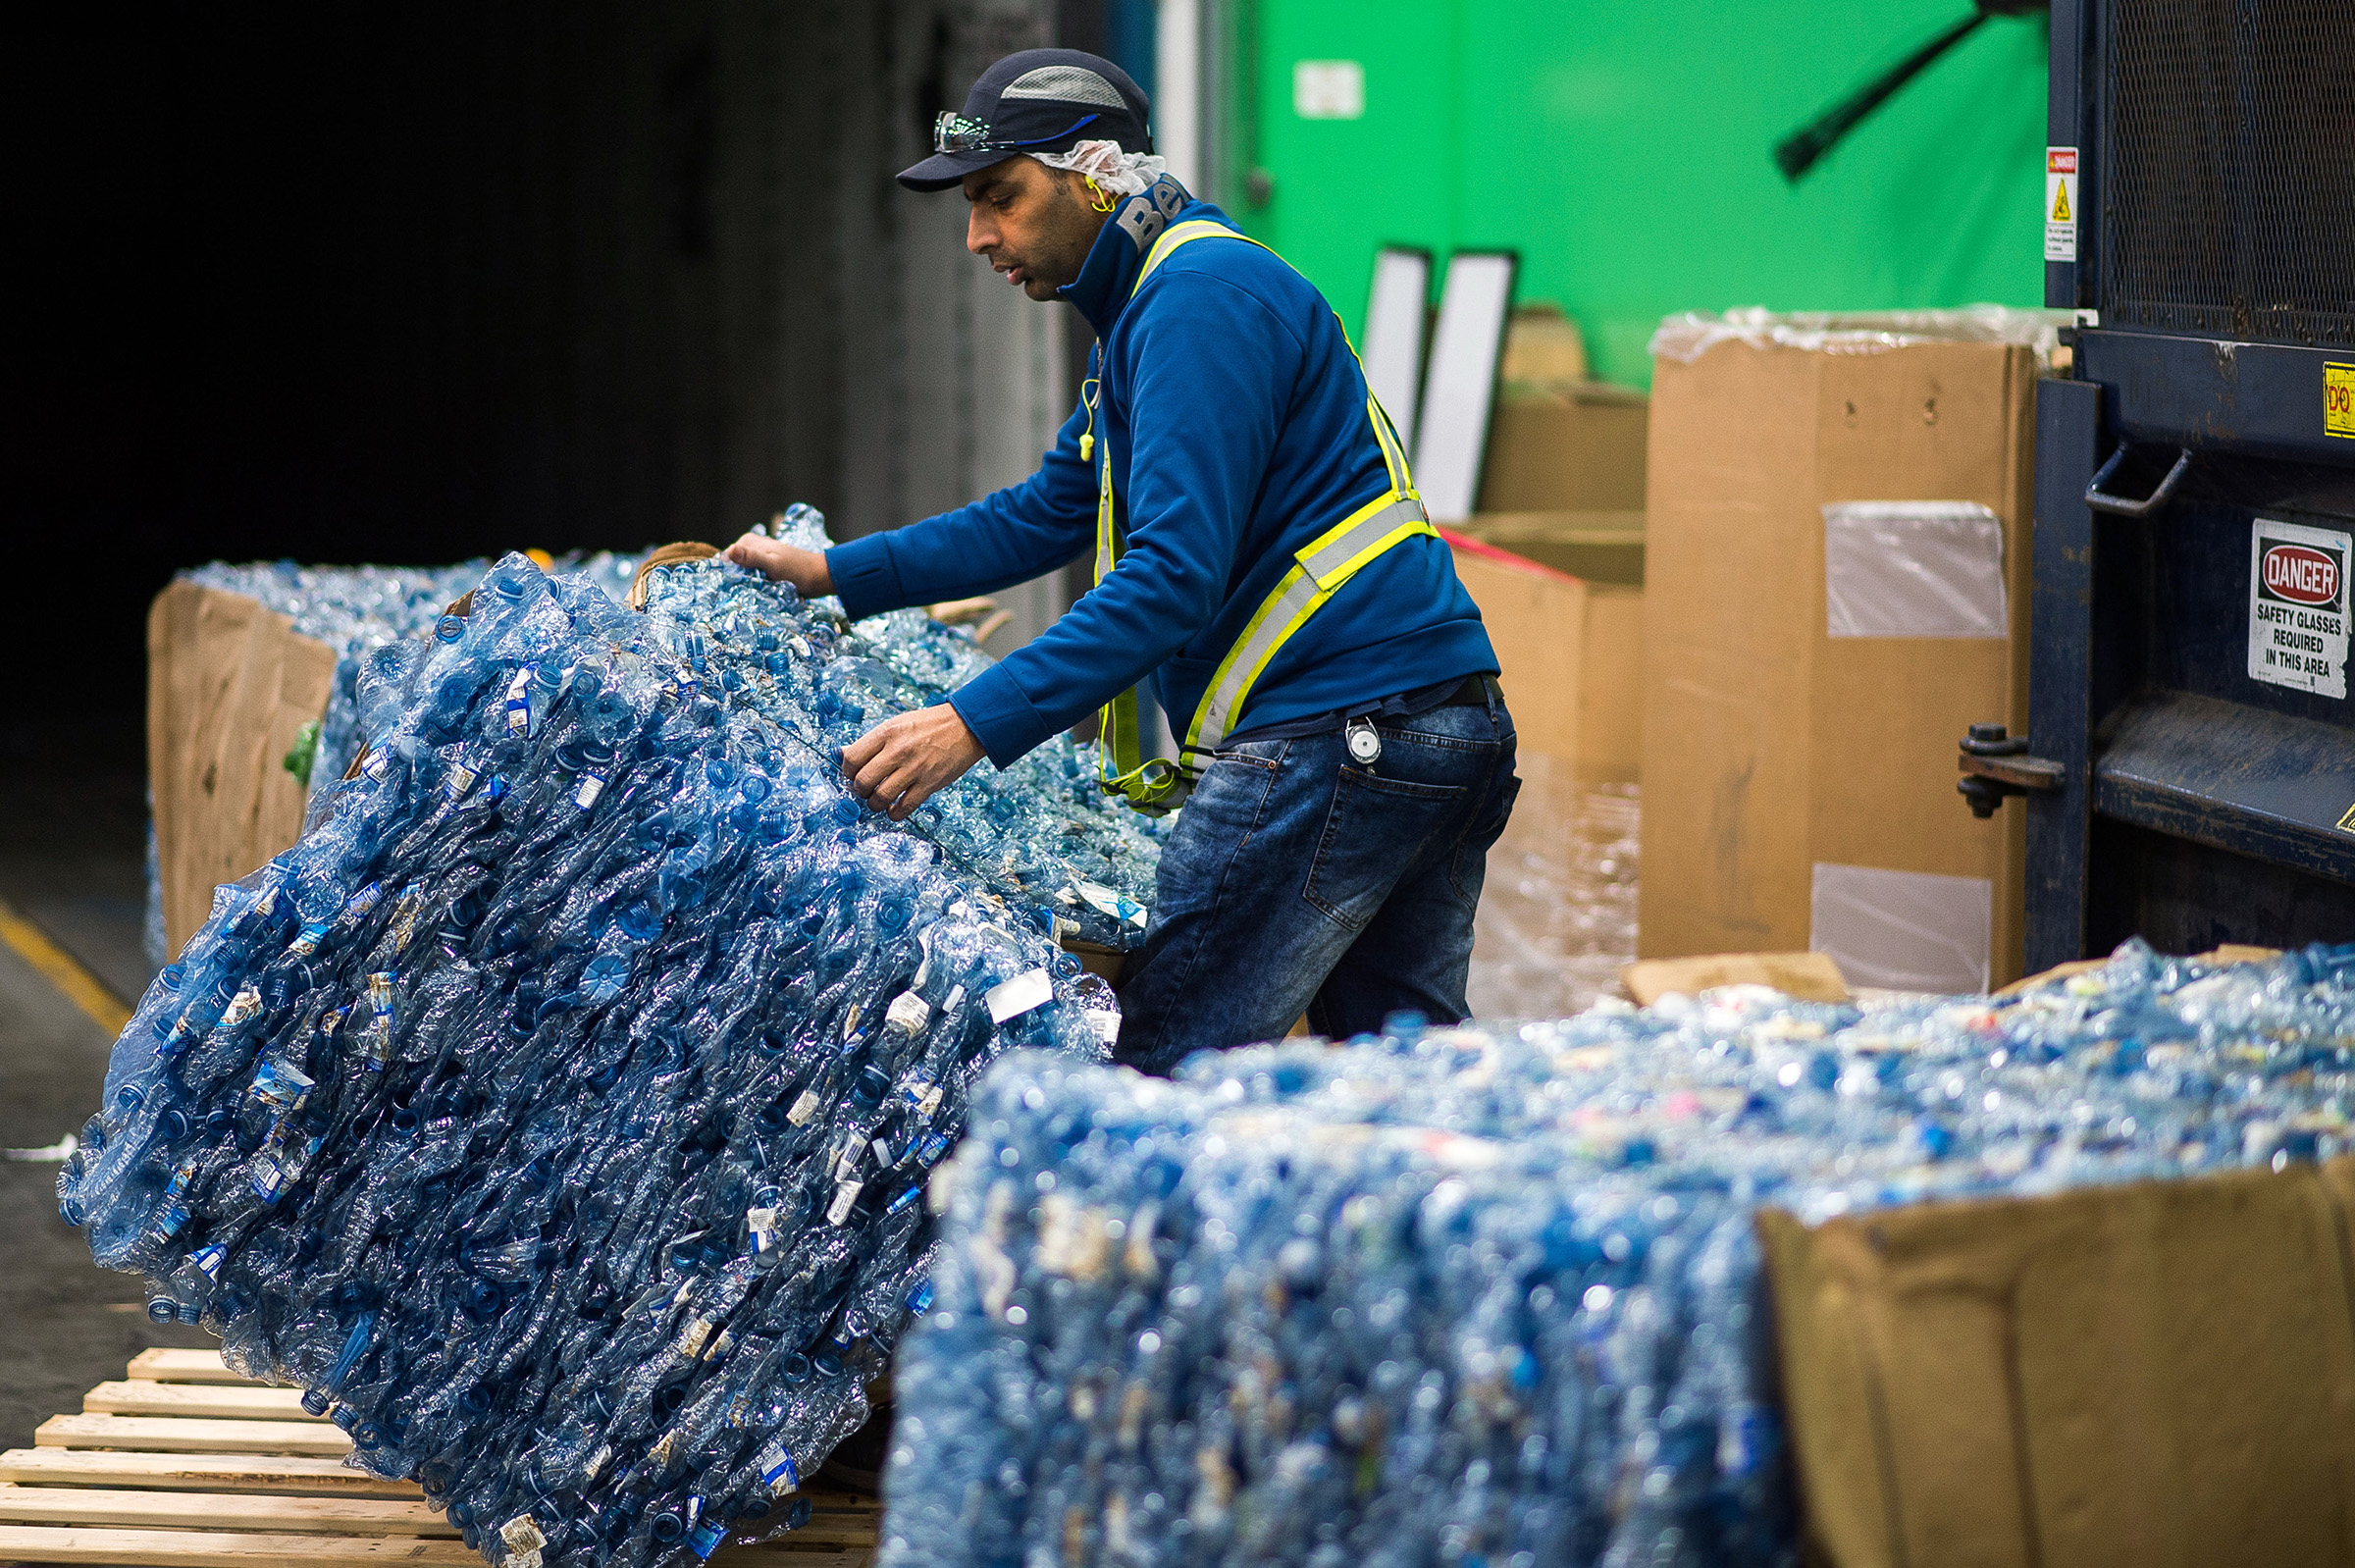 A worker moves a bundle of crushed plastic water bottles to be shipped to the Ice River Springs Water Co. Inc. recycling facility in Chilliwack, Canada, on Nov. 18, 2019. (James MacDonald—Bloomberg via Getty Images)